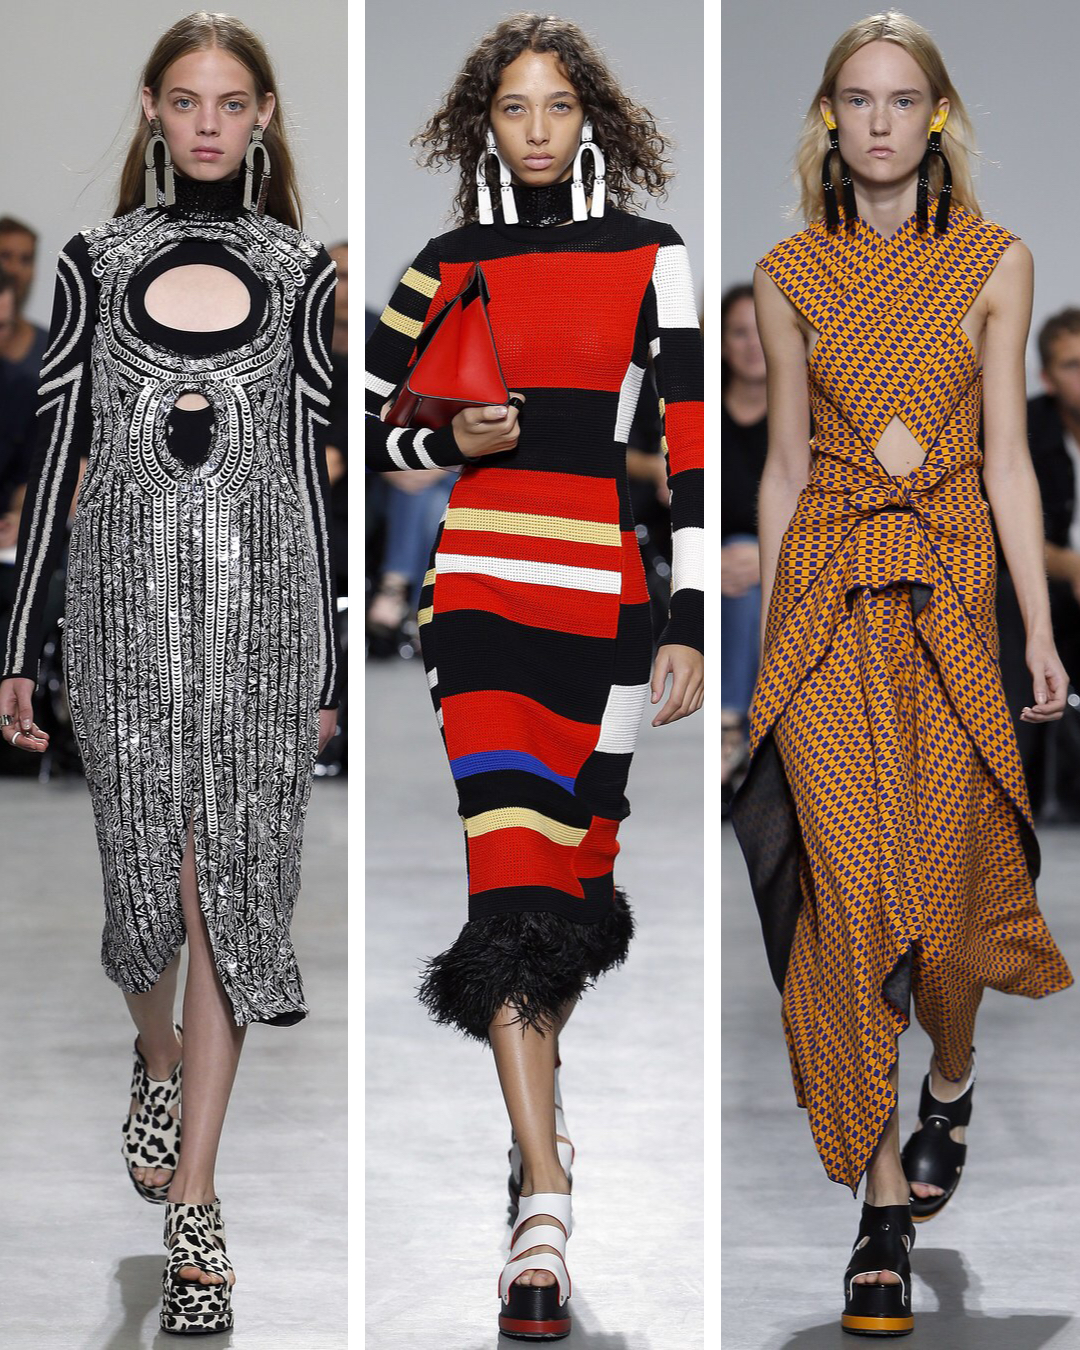 Proenza Schouler Spring 2017 ready to wear collection